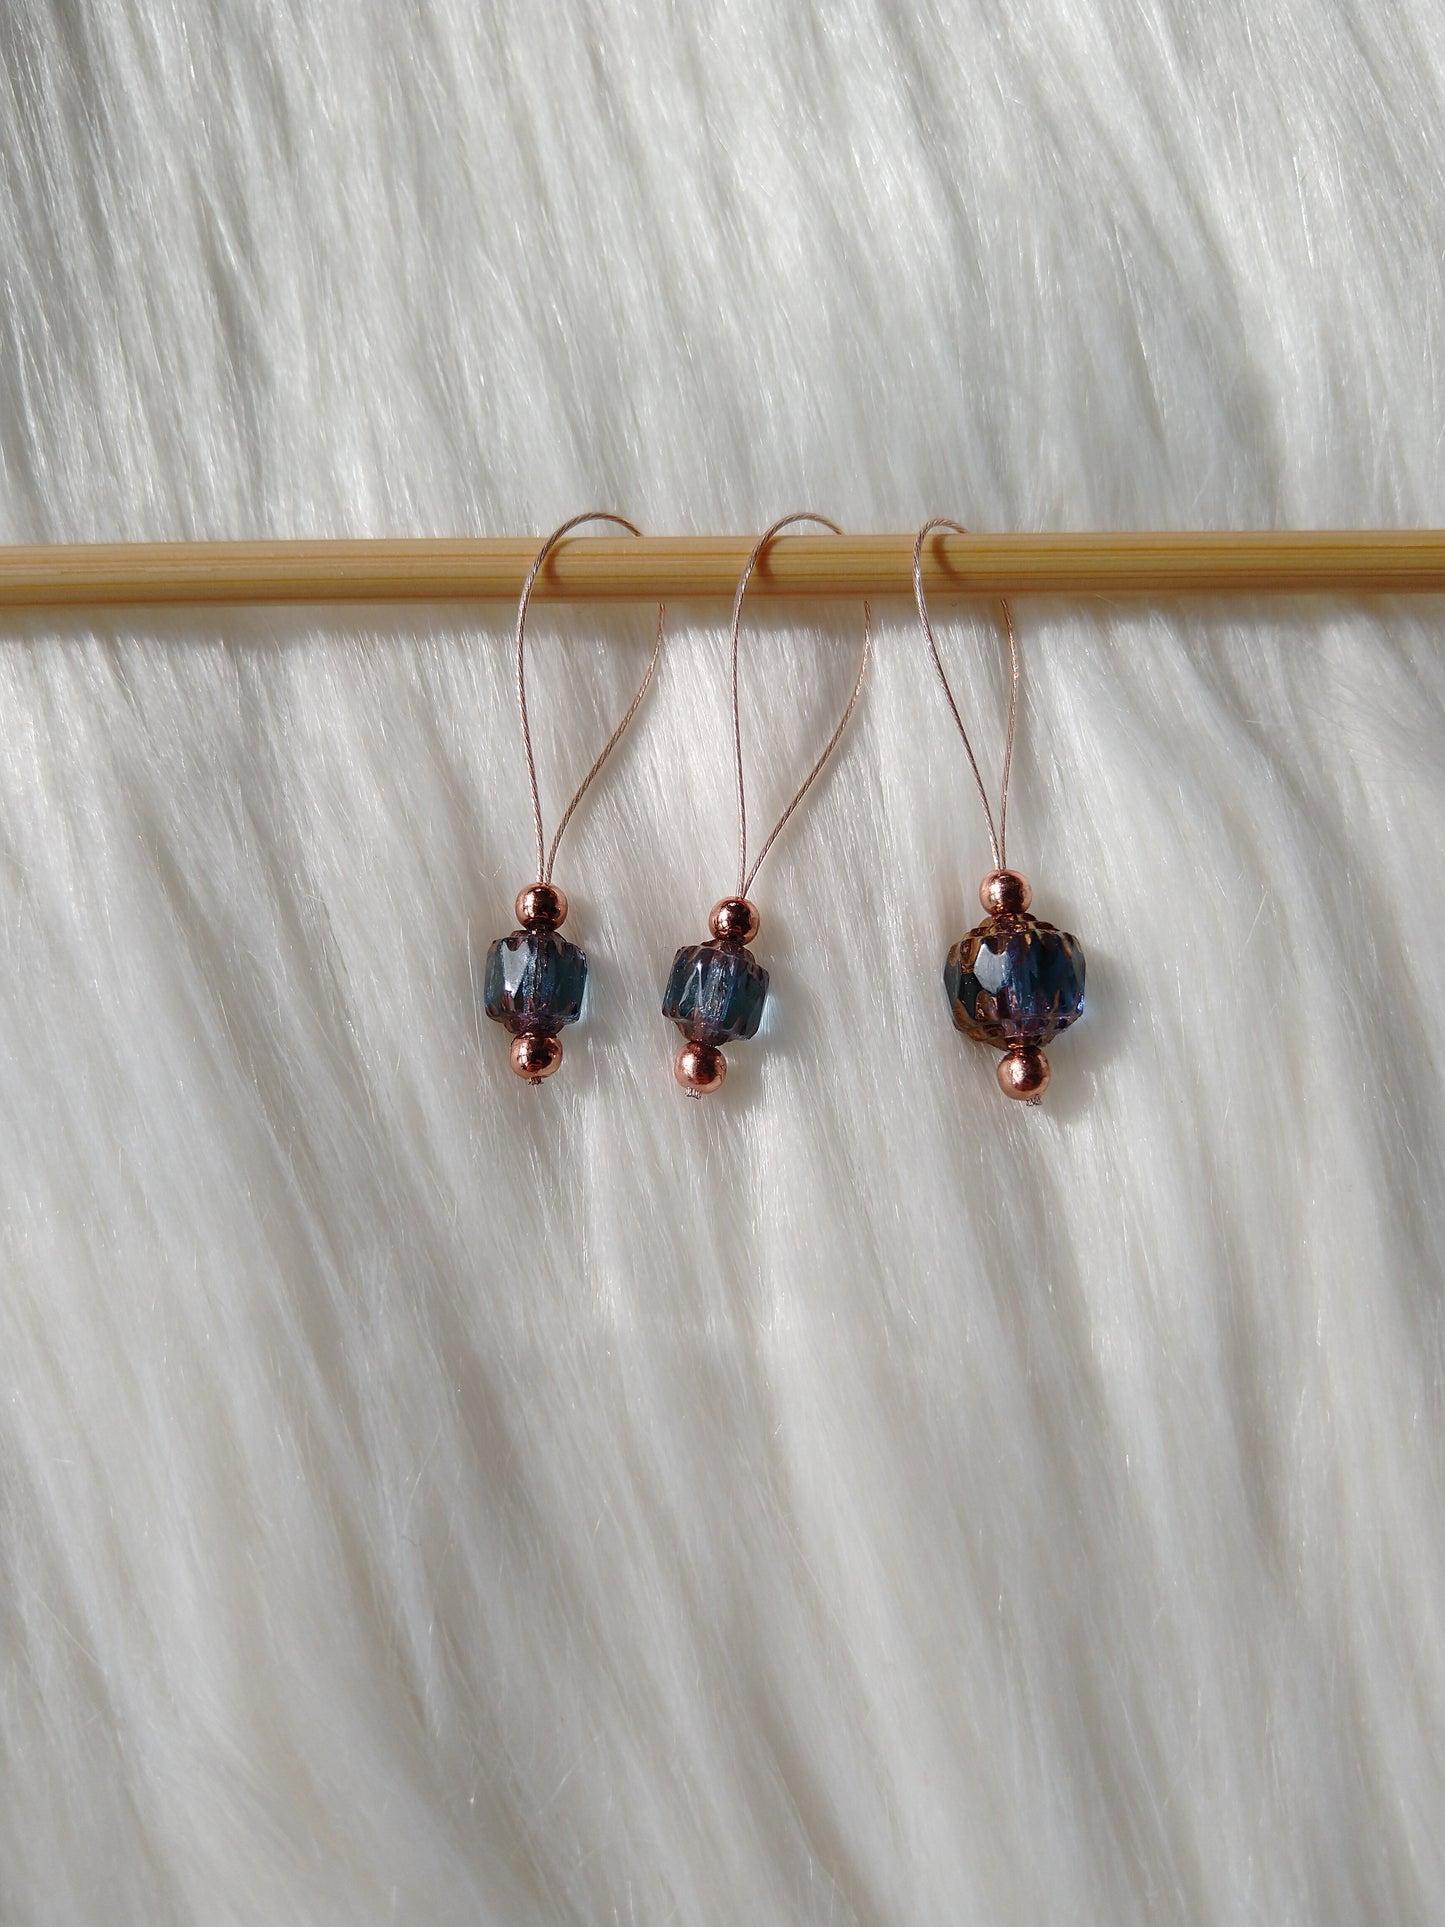 Stitch Markers - cathedral beads, set of 3